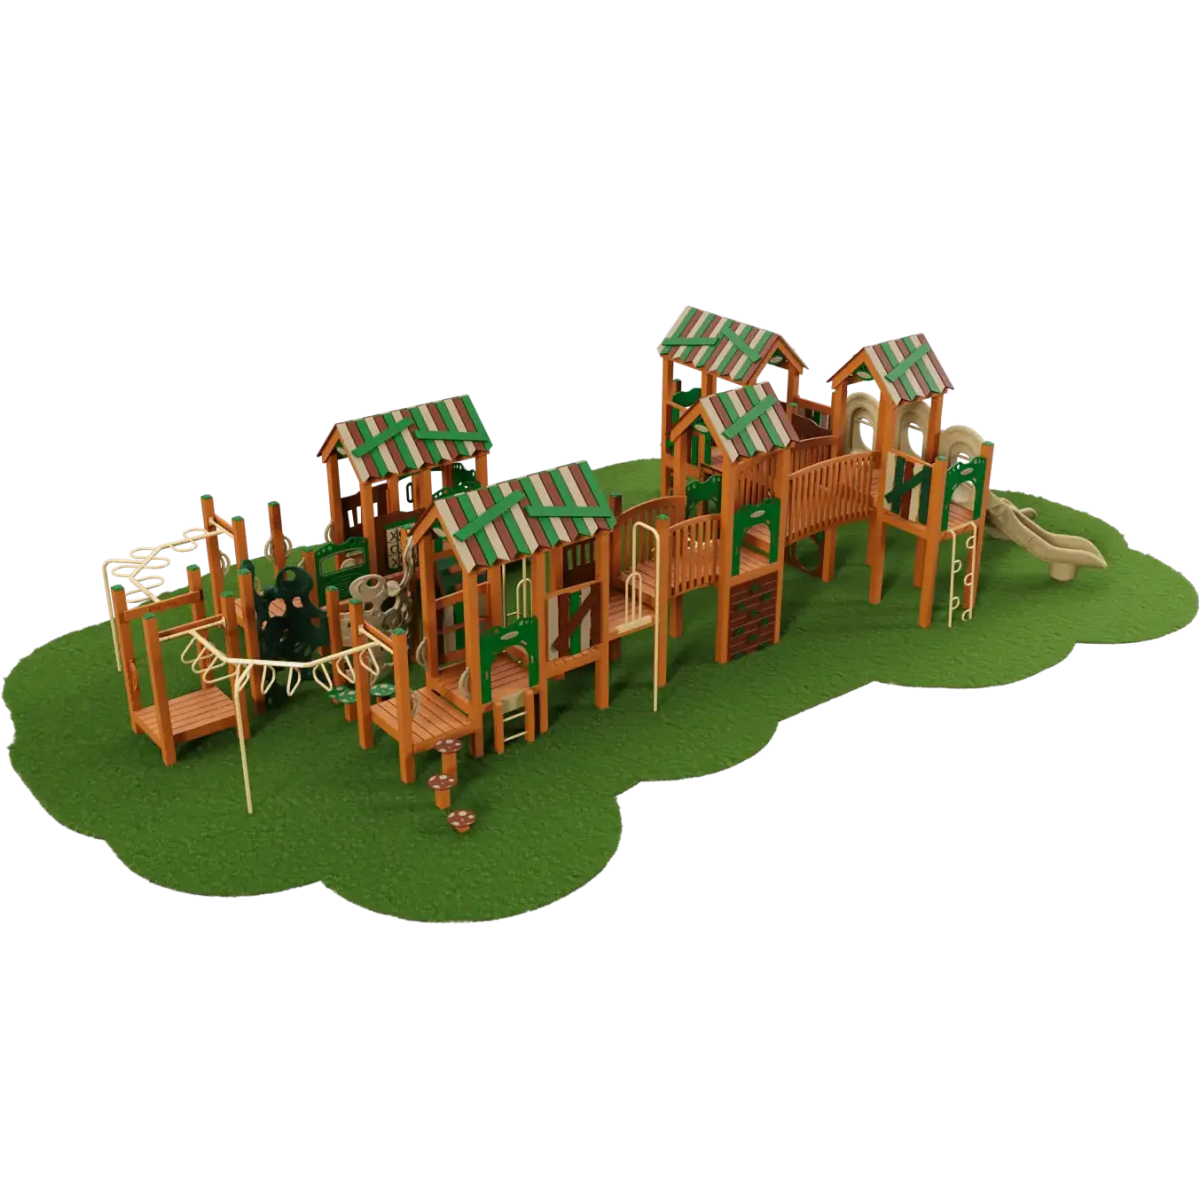 Discovery Den Playset - School-Age Playgrounds - Playtopia, Inc.